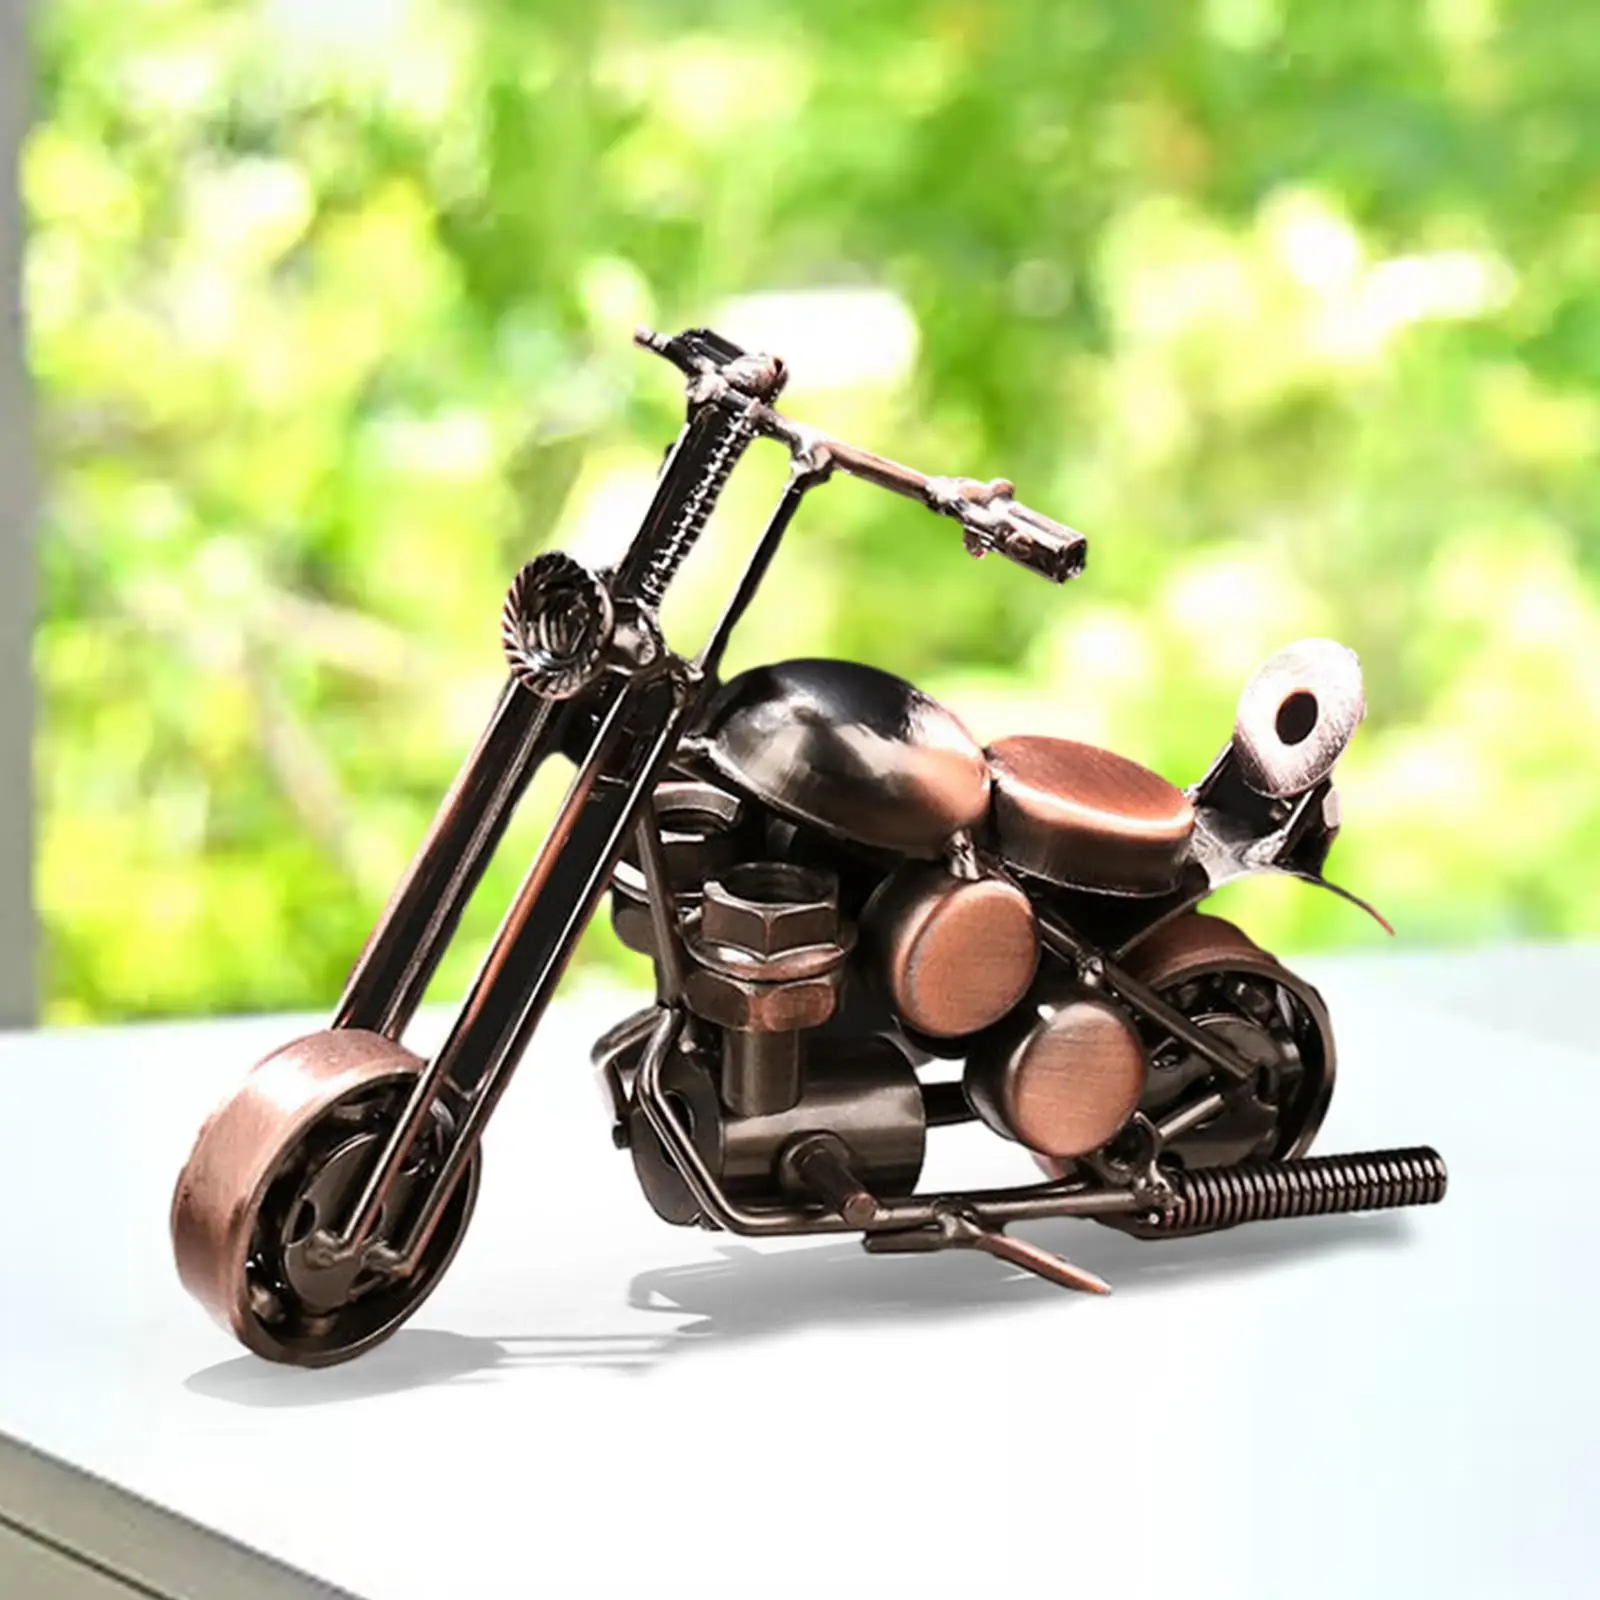 Motorcycle Model Collectible Figure, Creative Decoration Retro Style Motorcycle